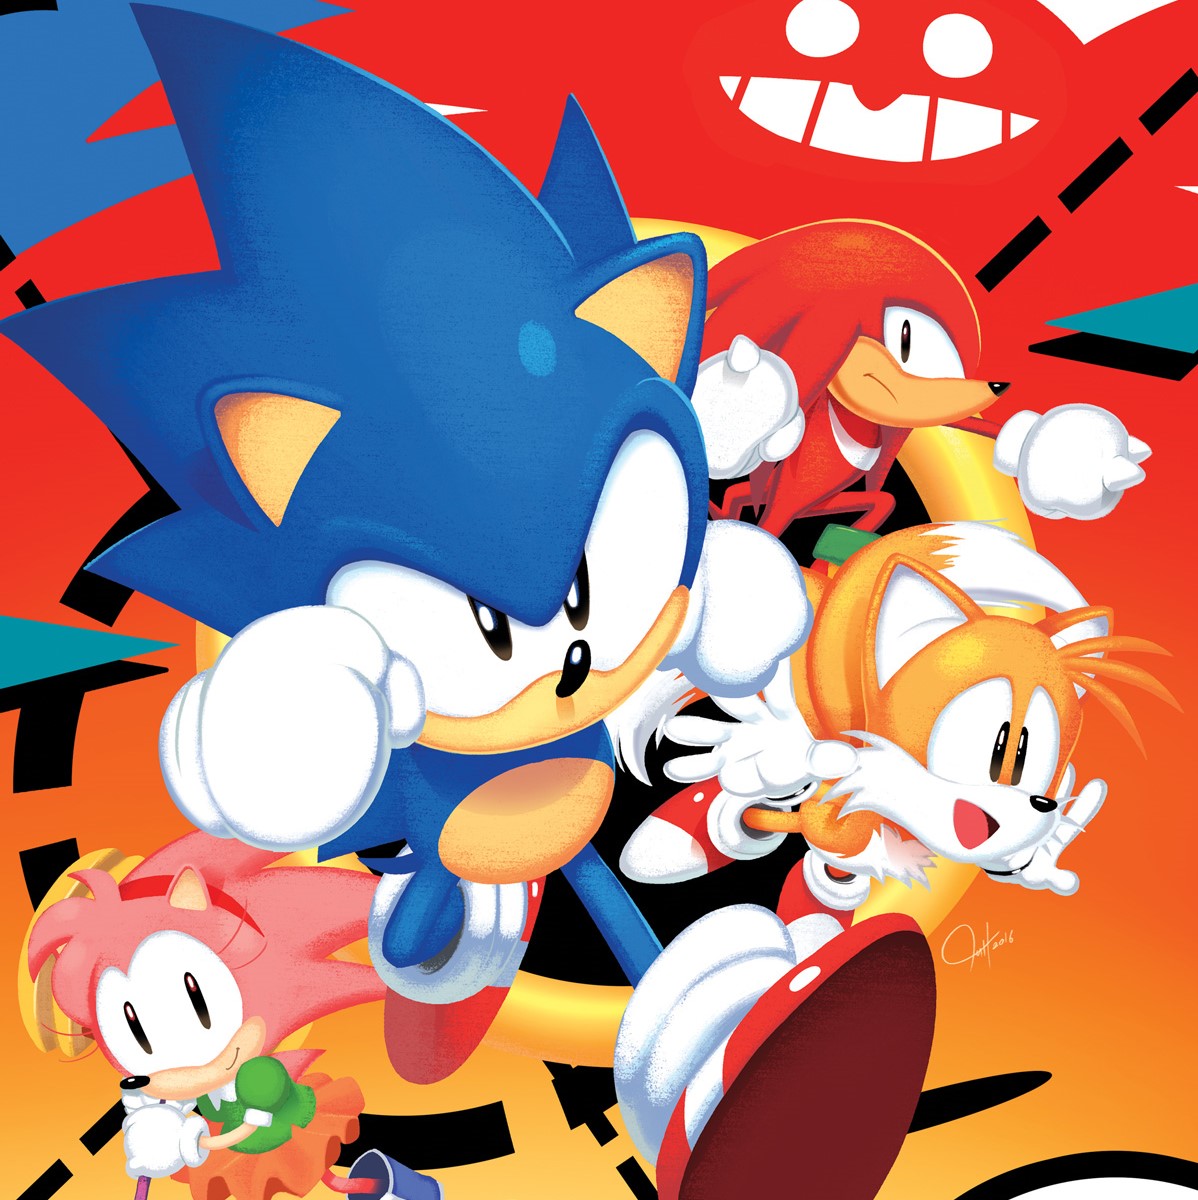 Idw Publishing To Release A Classic Sonic Miniseries In 2021 Tails Channel - classic sonic roblox